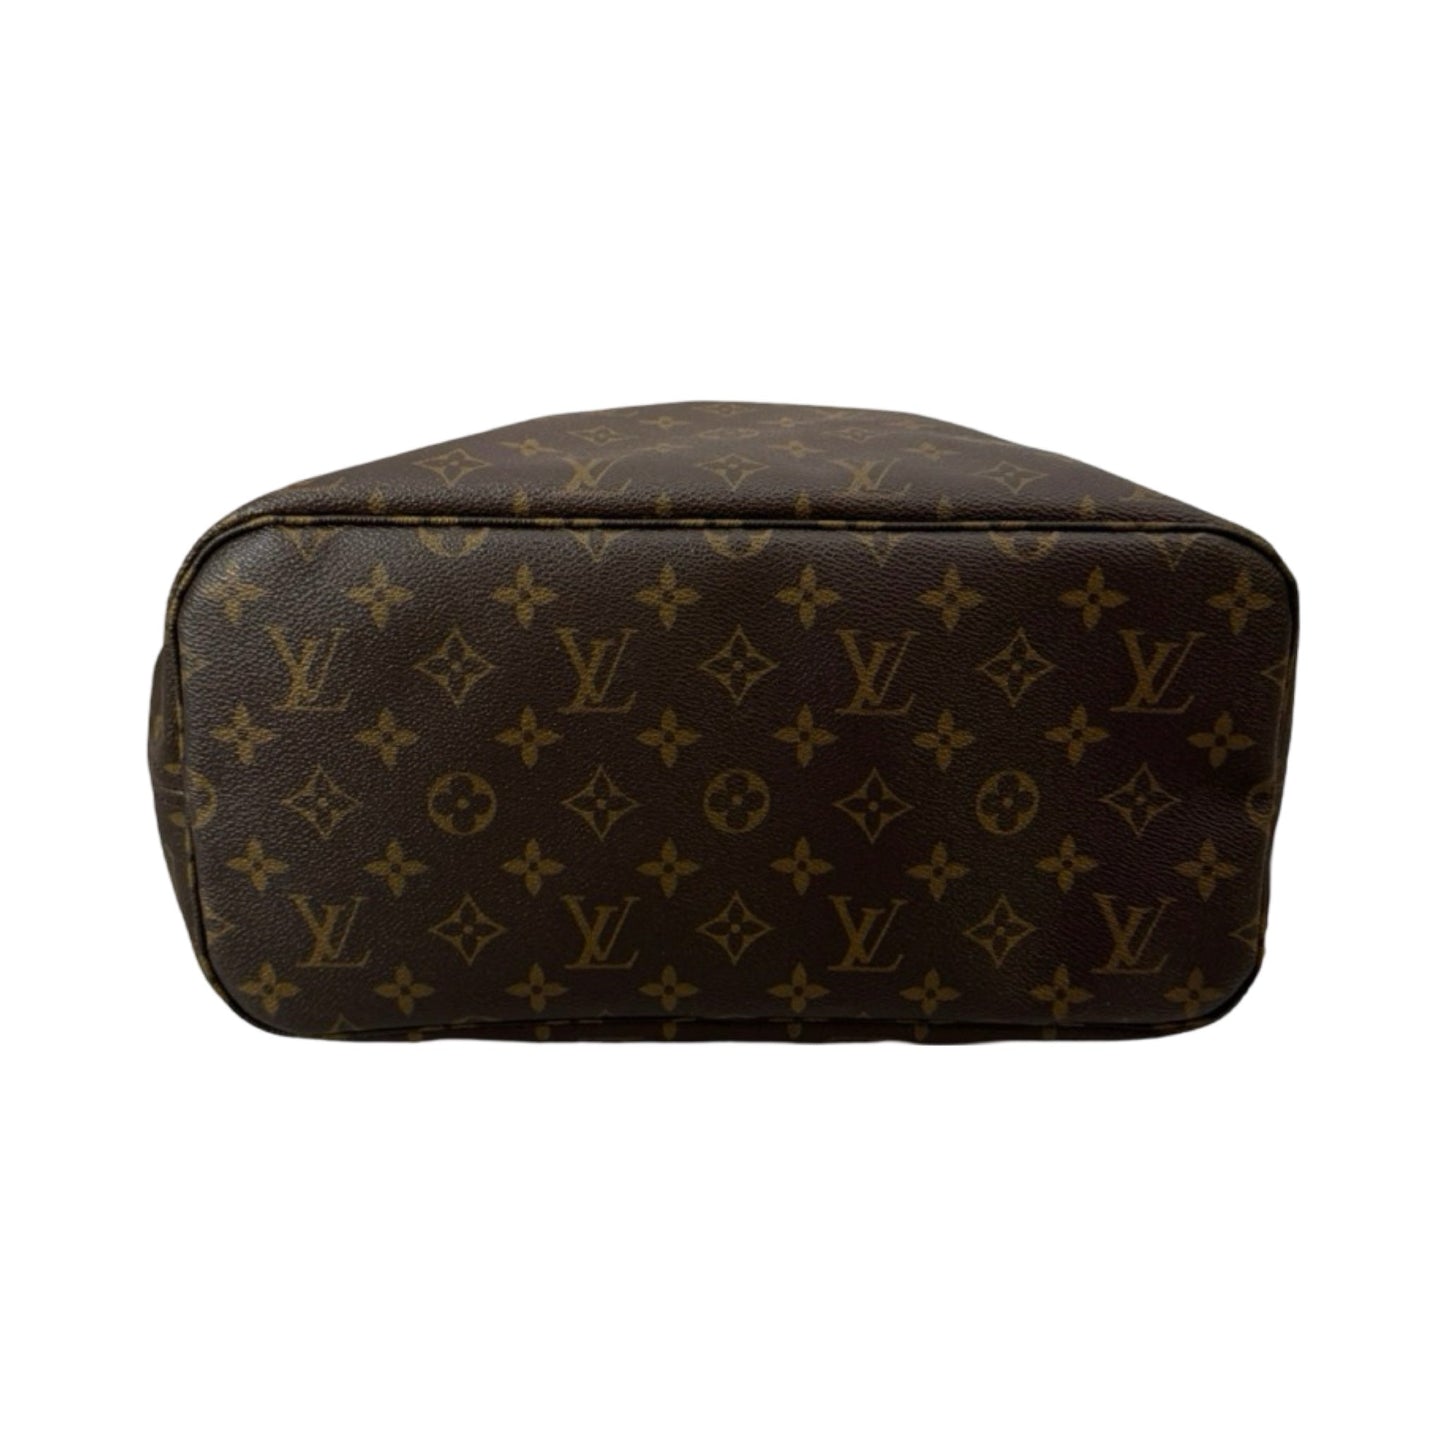 Neverfull Coated Canvas Monogram Brown Dual Vachetta Leather Straps with Gold-Tone Hardware Tote Luxury Designer Louis Vuitton, Size Medium